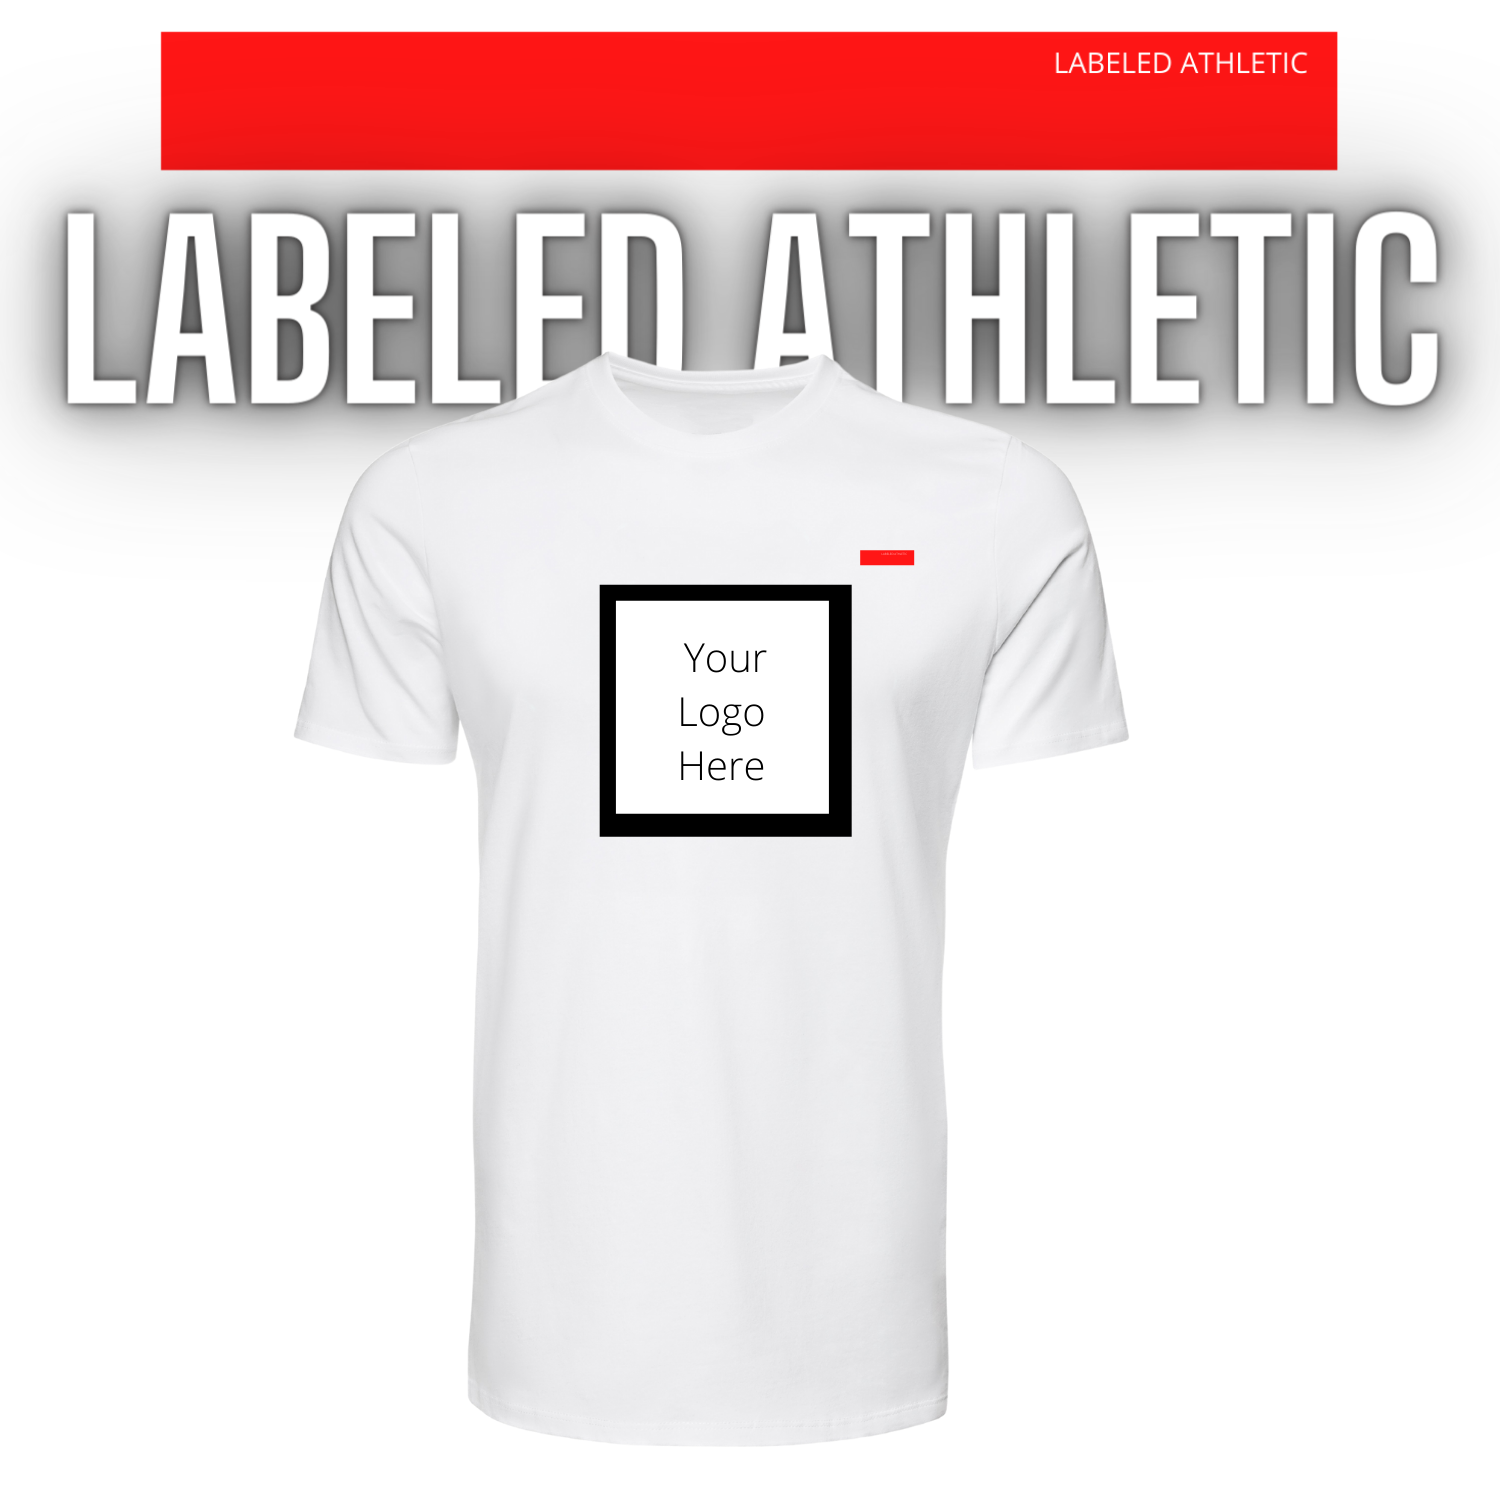 OMGlutecamp (CropTops) I AM LABELED ATHLETIC - OMGlute Camp - Rush Order